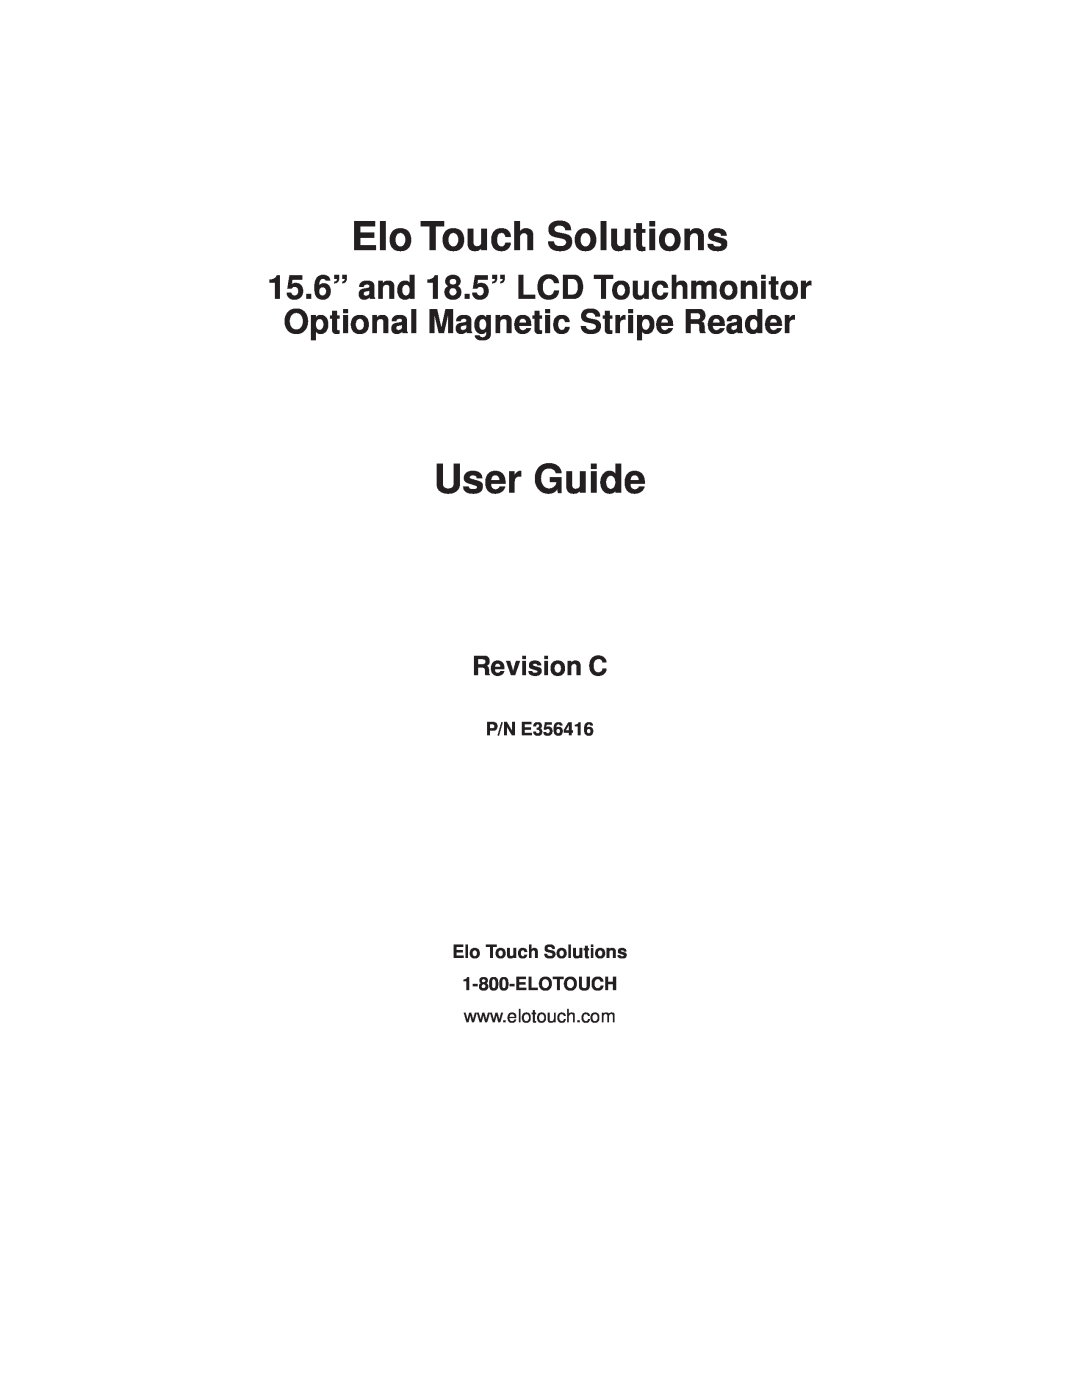 Elo TouchSystems 1919L Elo Touch Solutions, User Guide, 15.6” and 18.5” LCD Touchmonitor Optional Magnetic Stripe Reader 